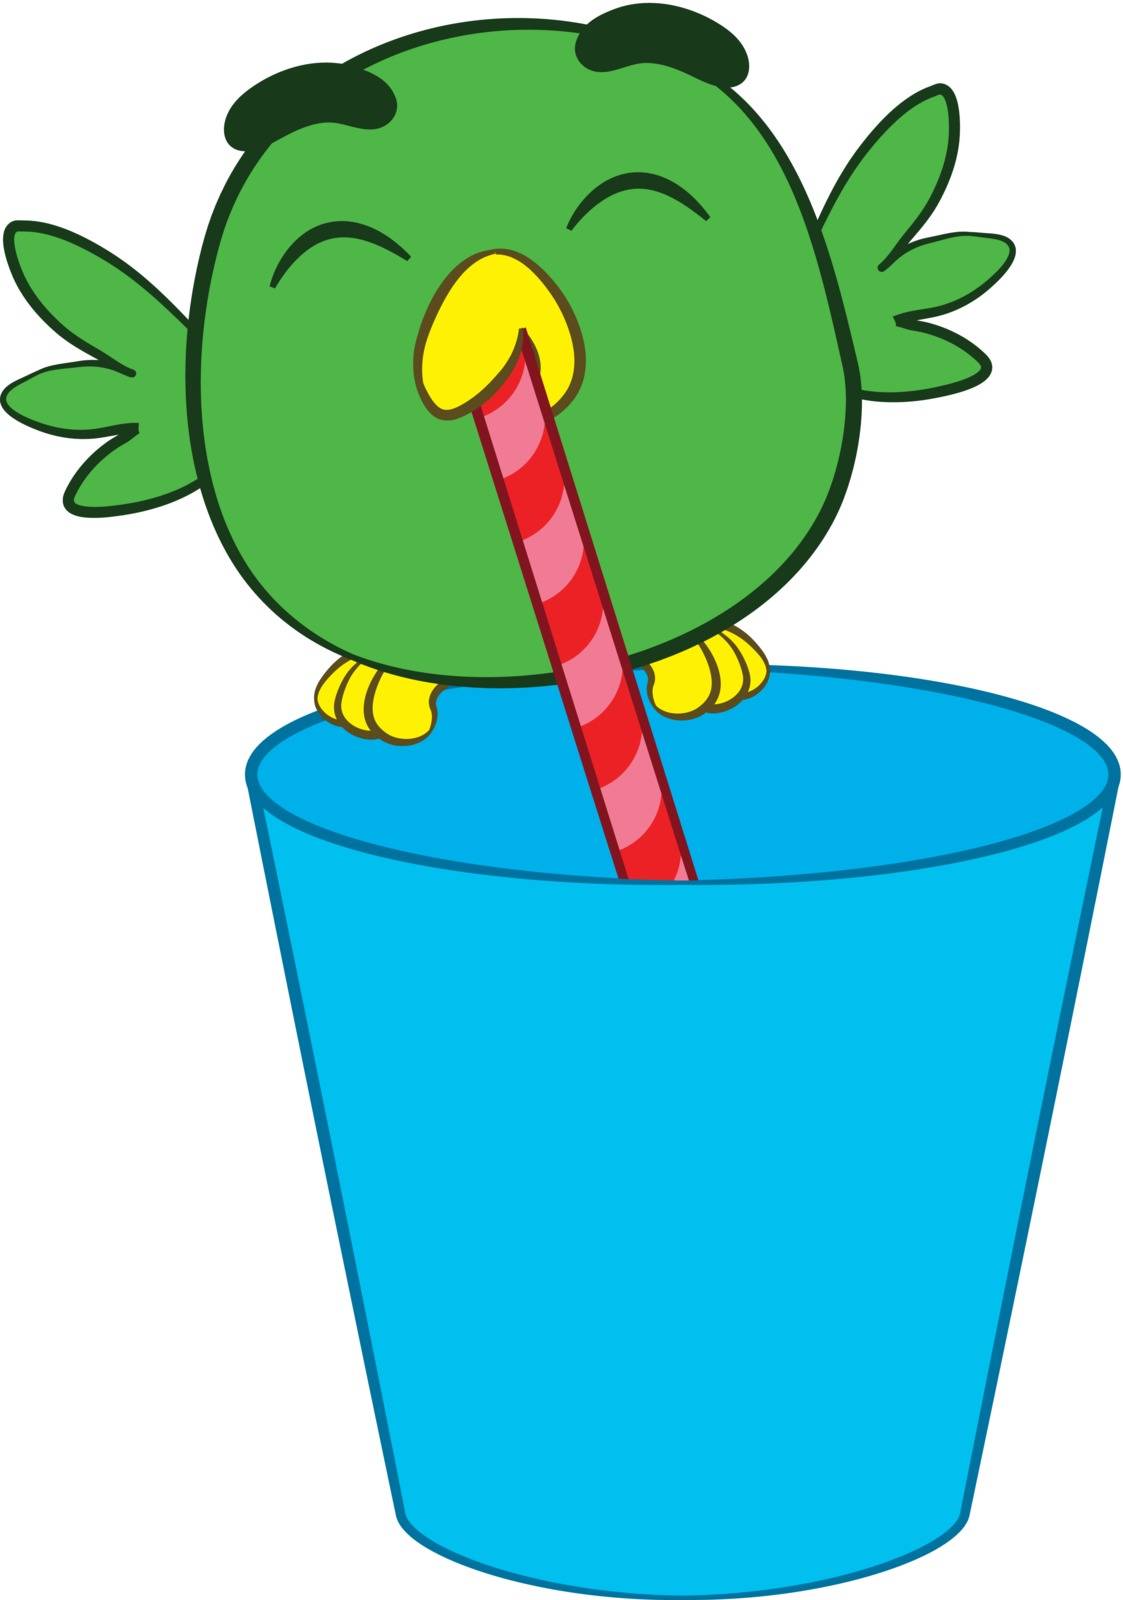 Adorable little green cartoon bird drinking through a straw from a colourful blue plastic glass or mug while balanced on the rim, vector illustration on white